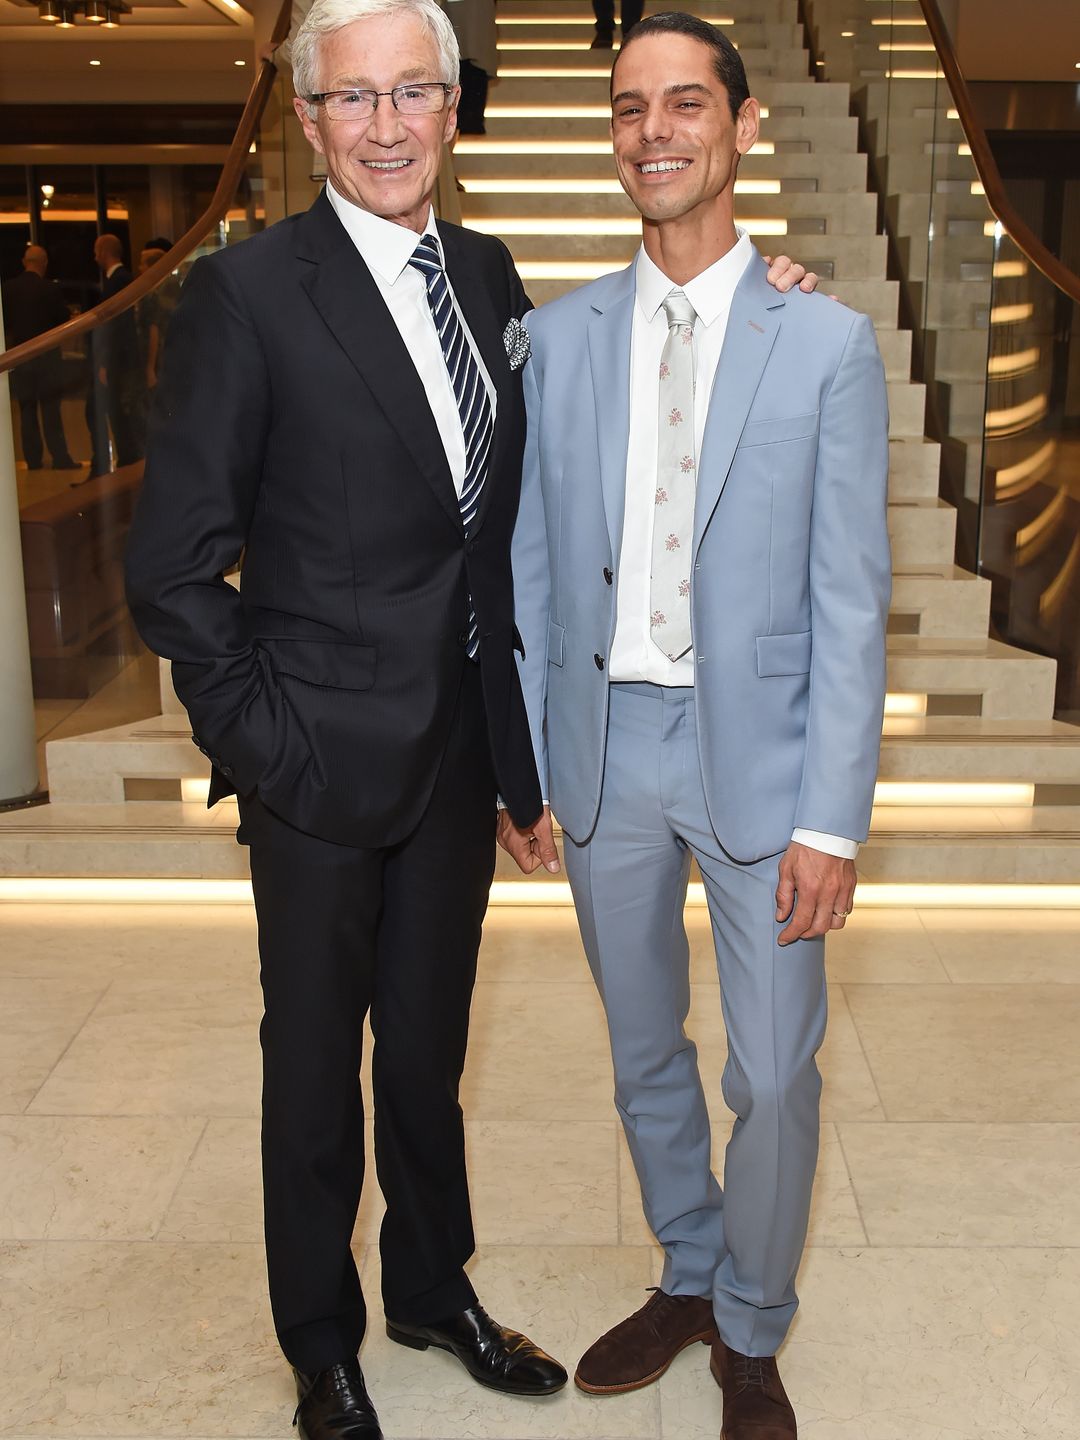 Paul O'Grady with his partner Andre Portasio dressed in suits